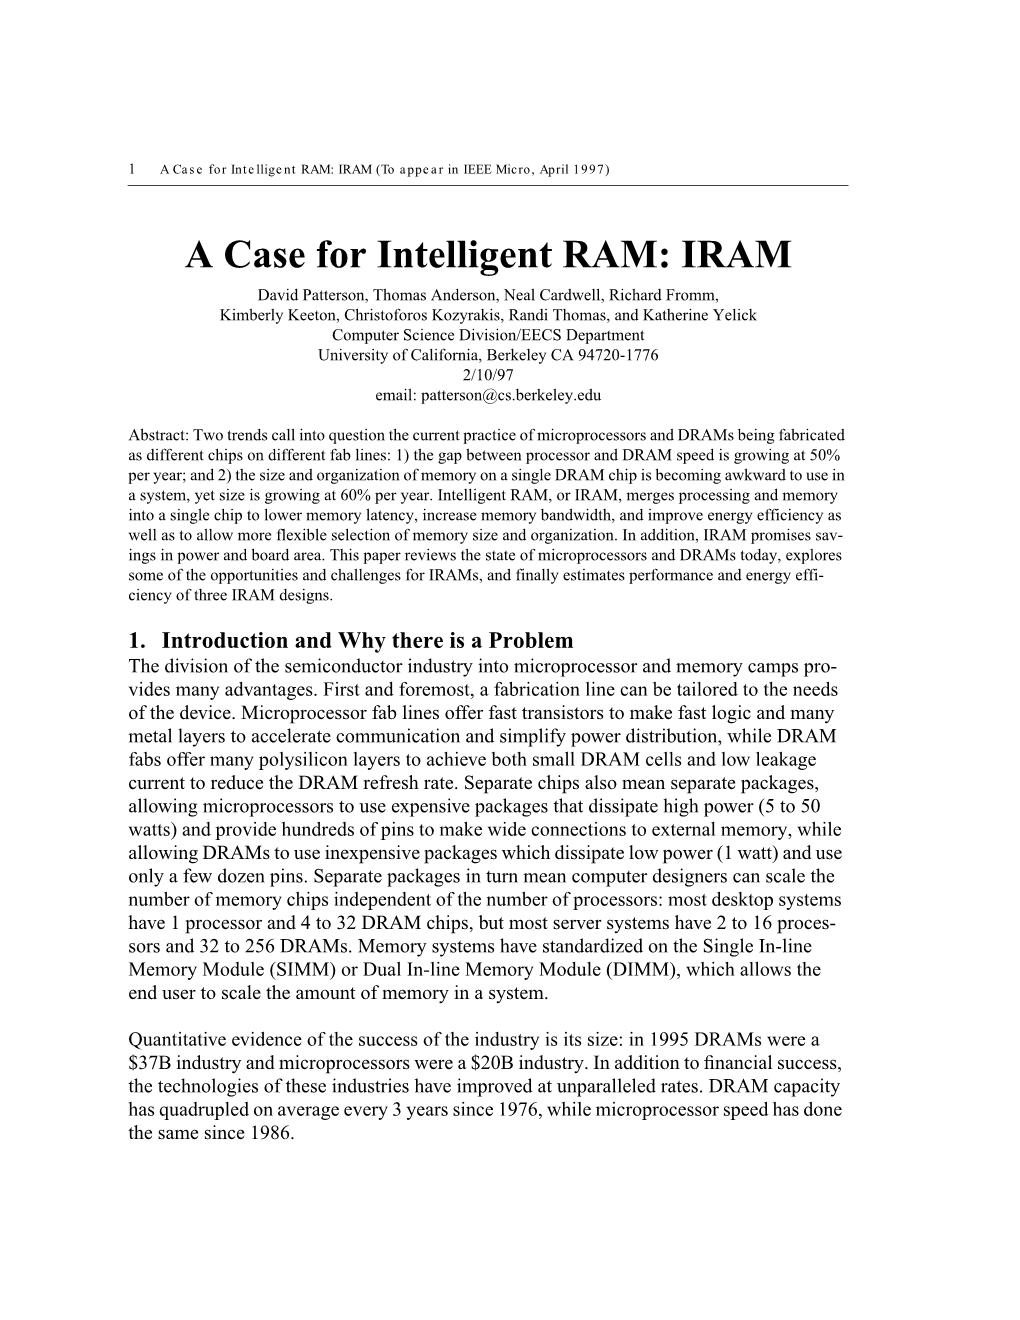 A Case for Intelligent RAM: IRAM (To Appear in IEEE Micro, April 1997)